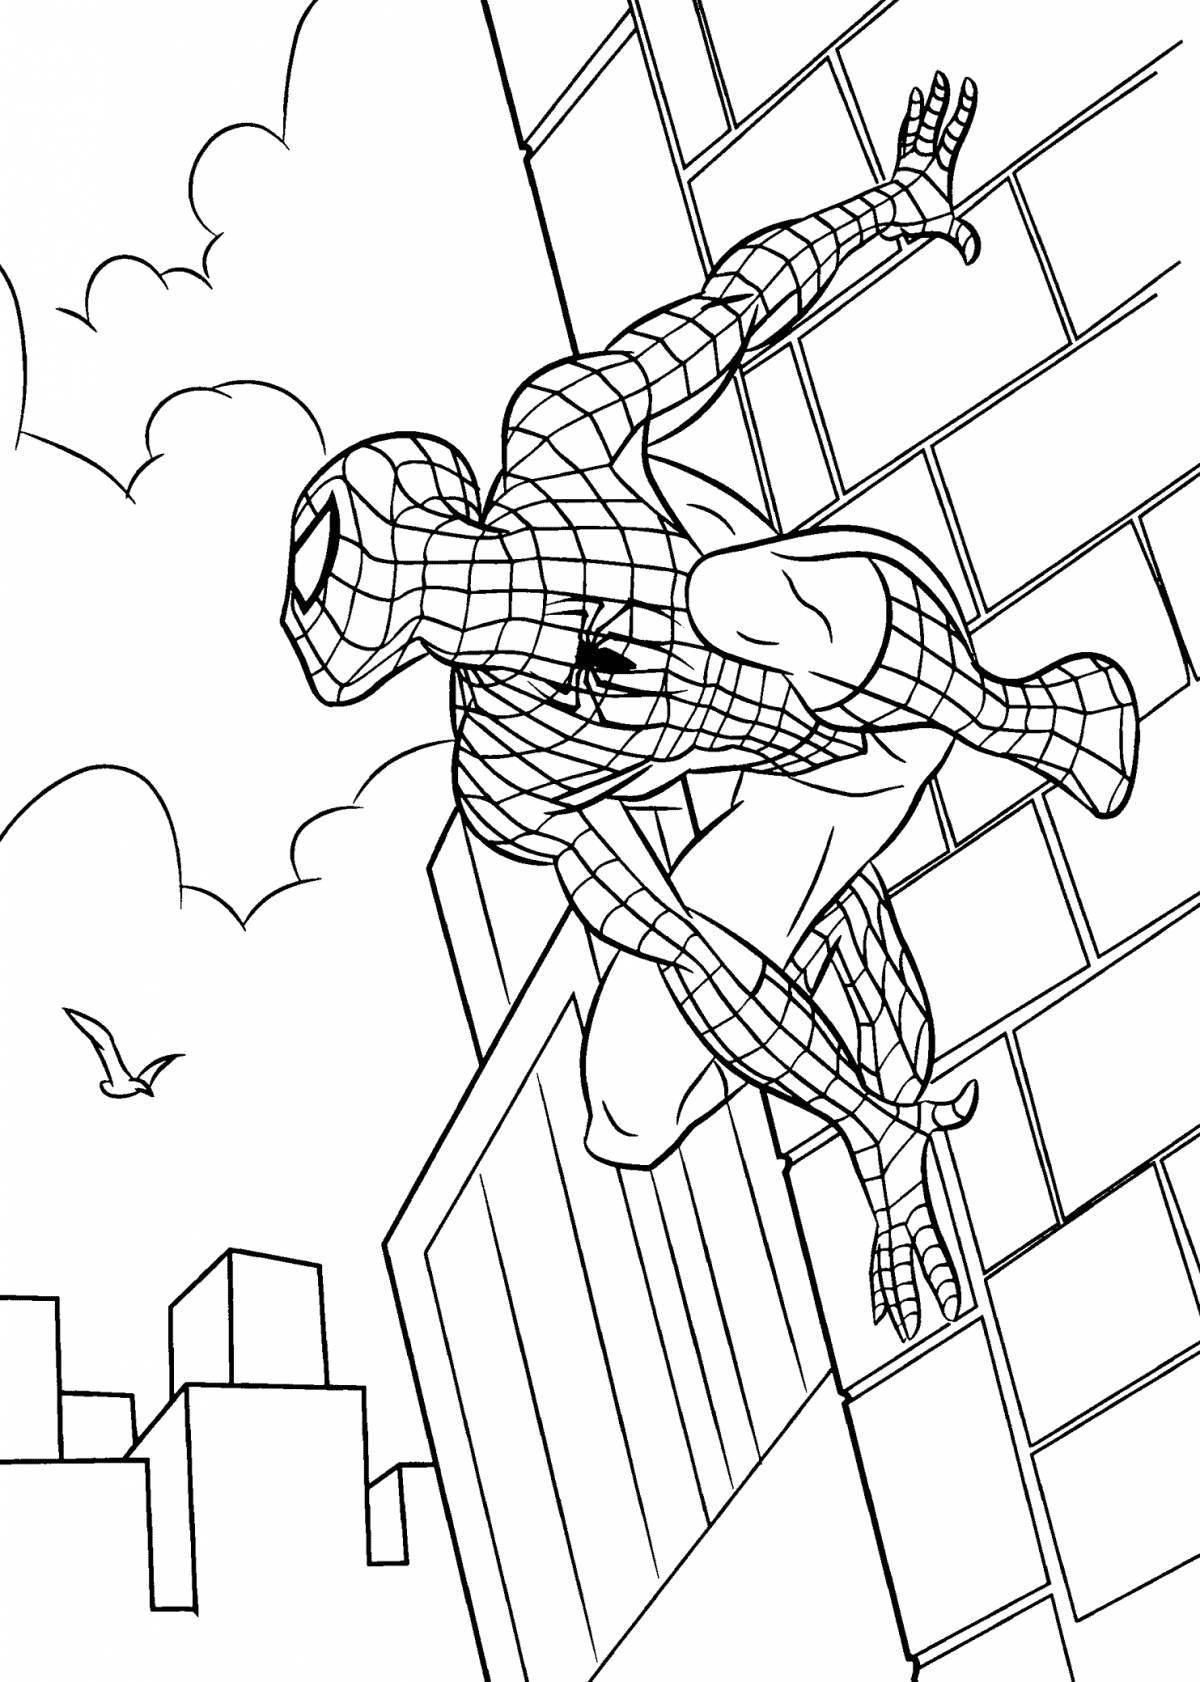 Great coloring of spider-man